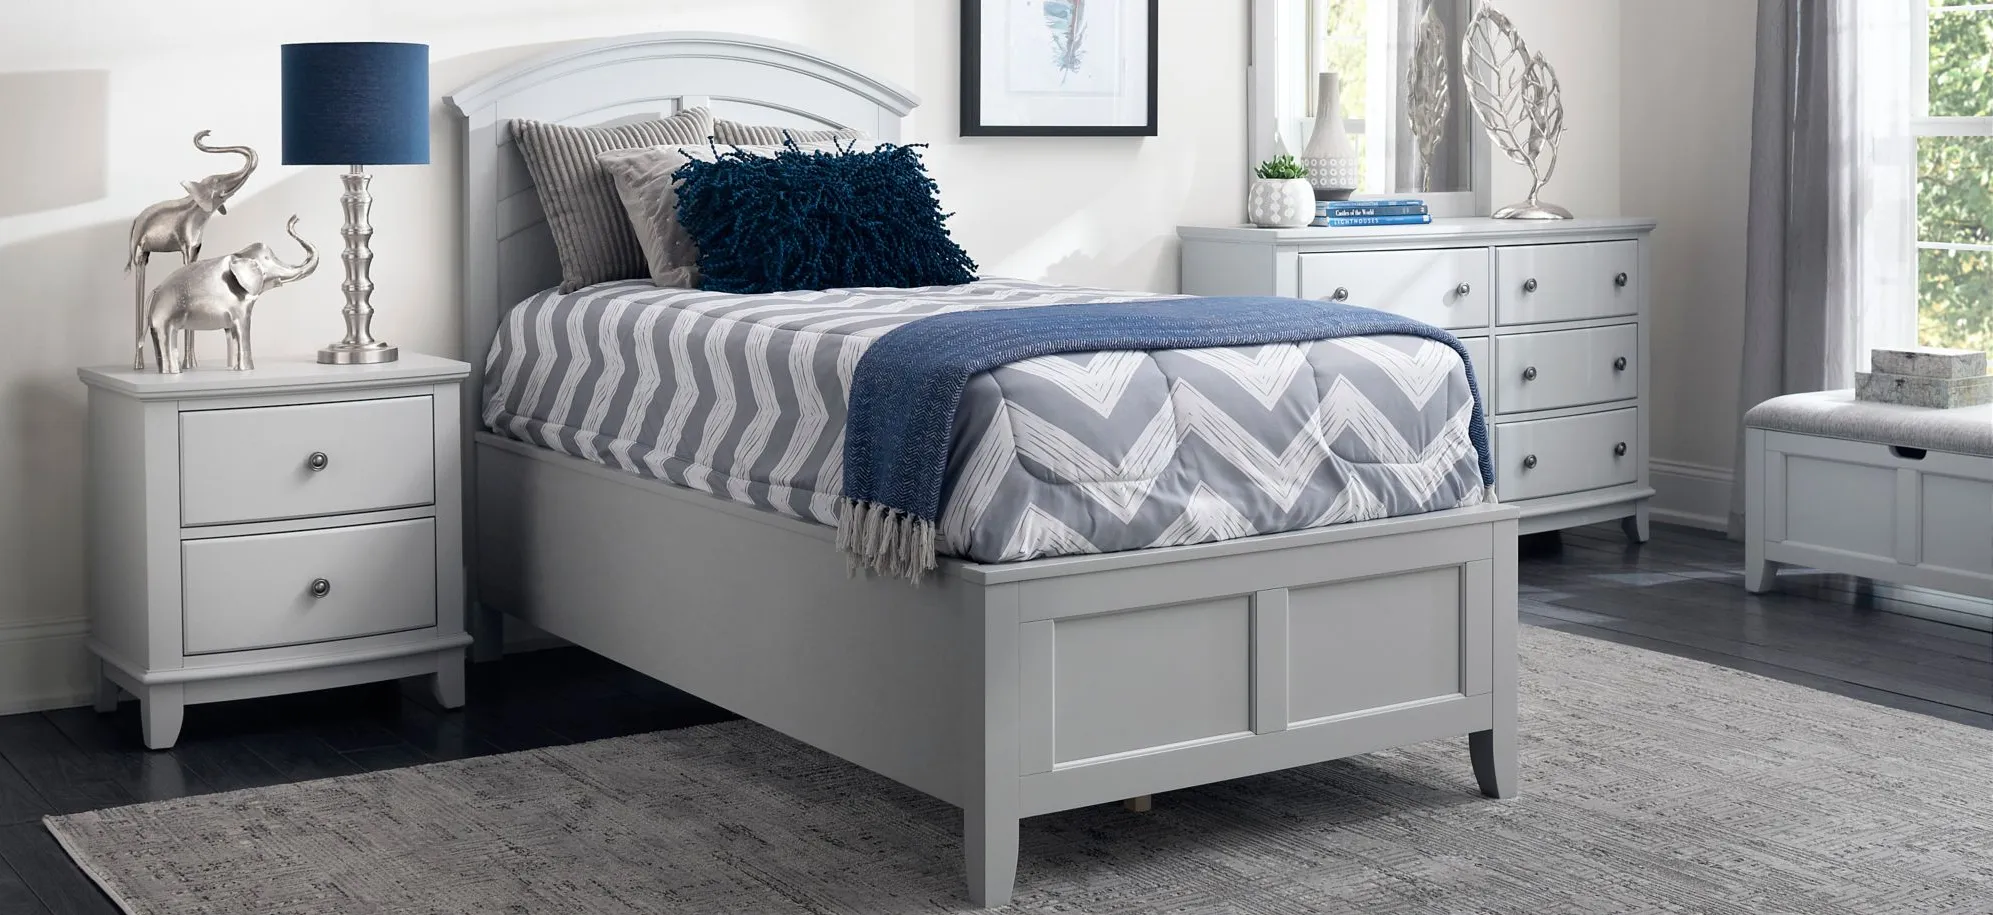 Kylie Youth 4-pc. Platform Bedroom Set in Gray by Bellanest